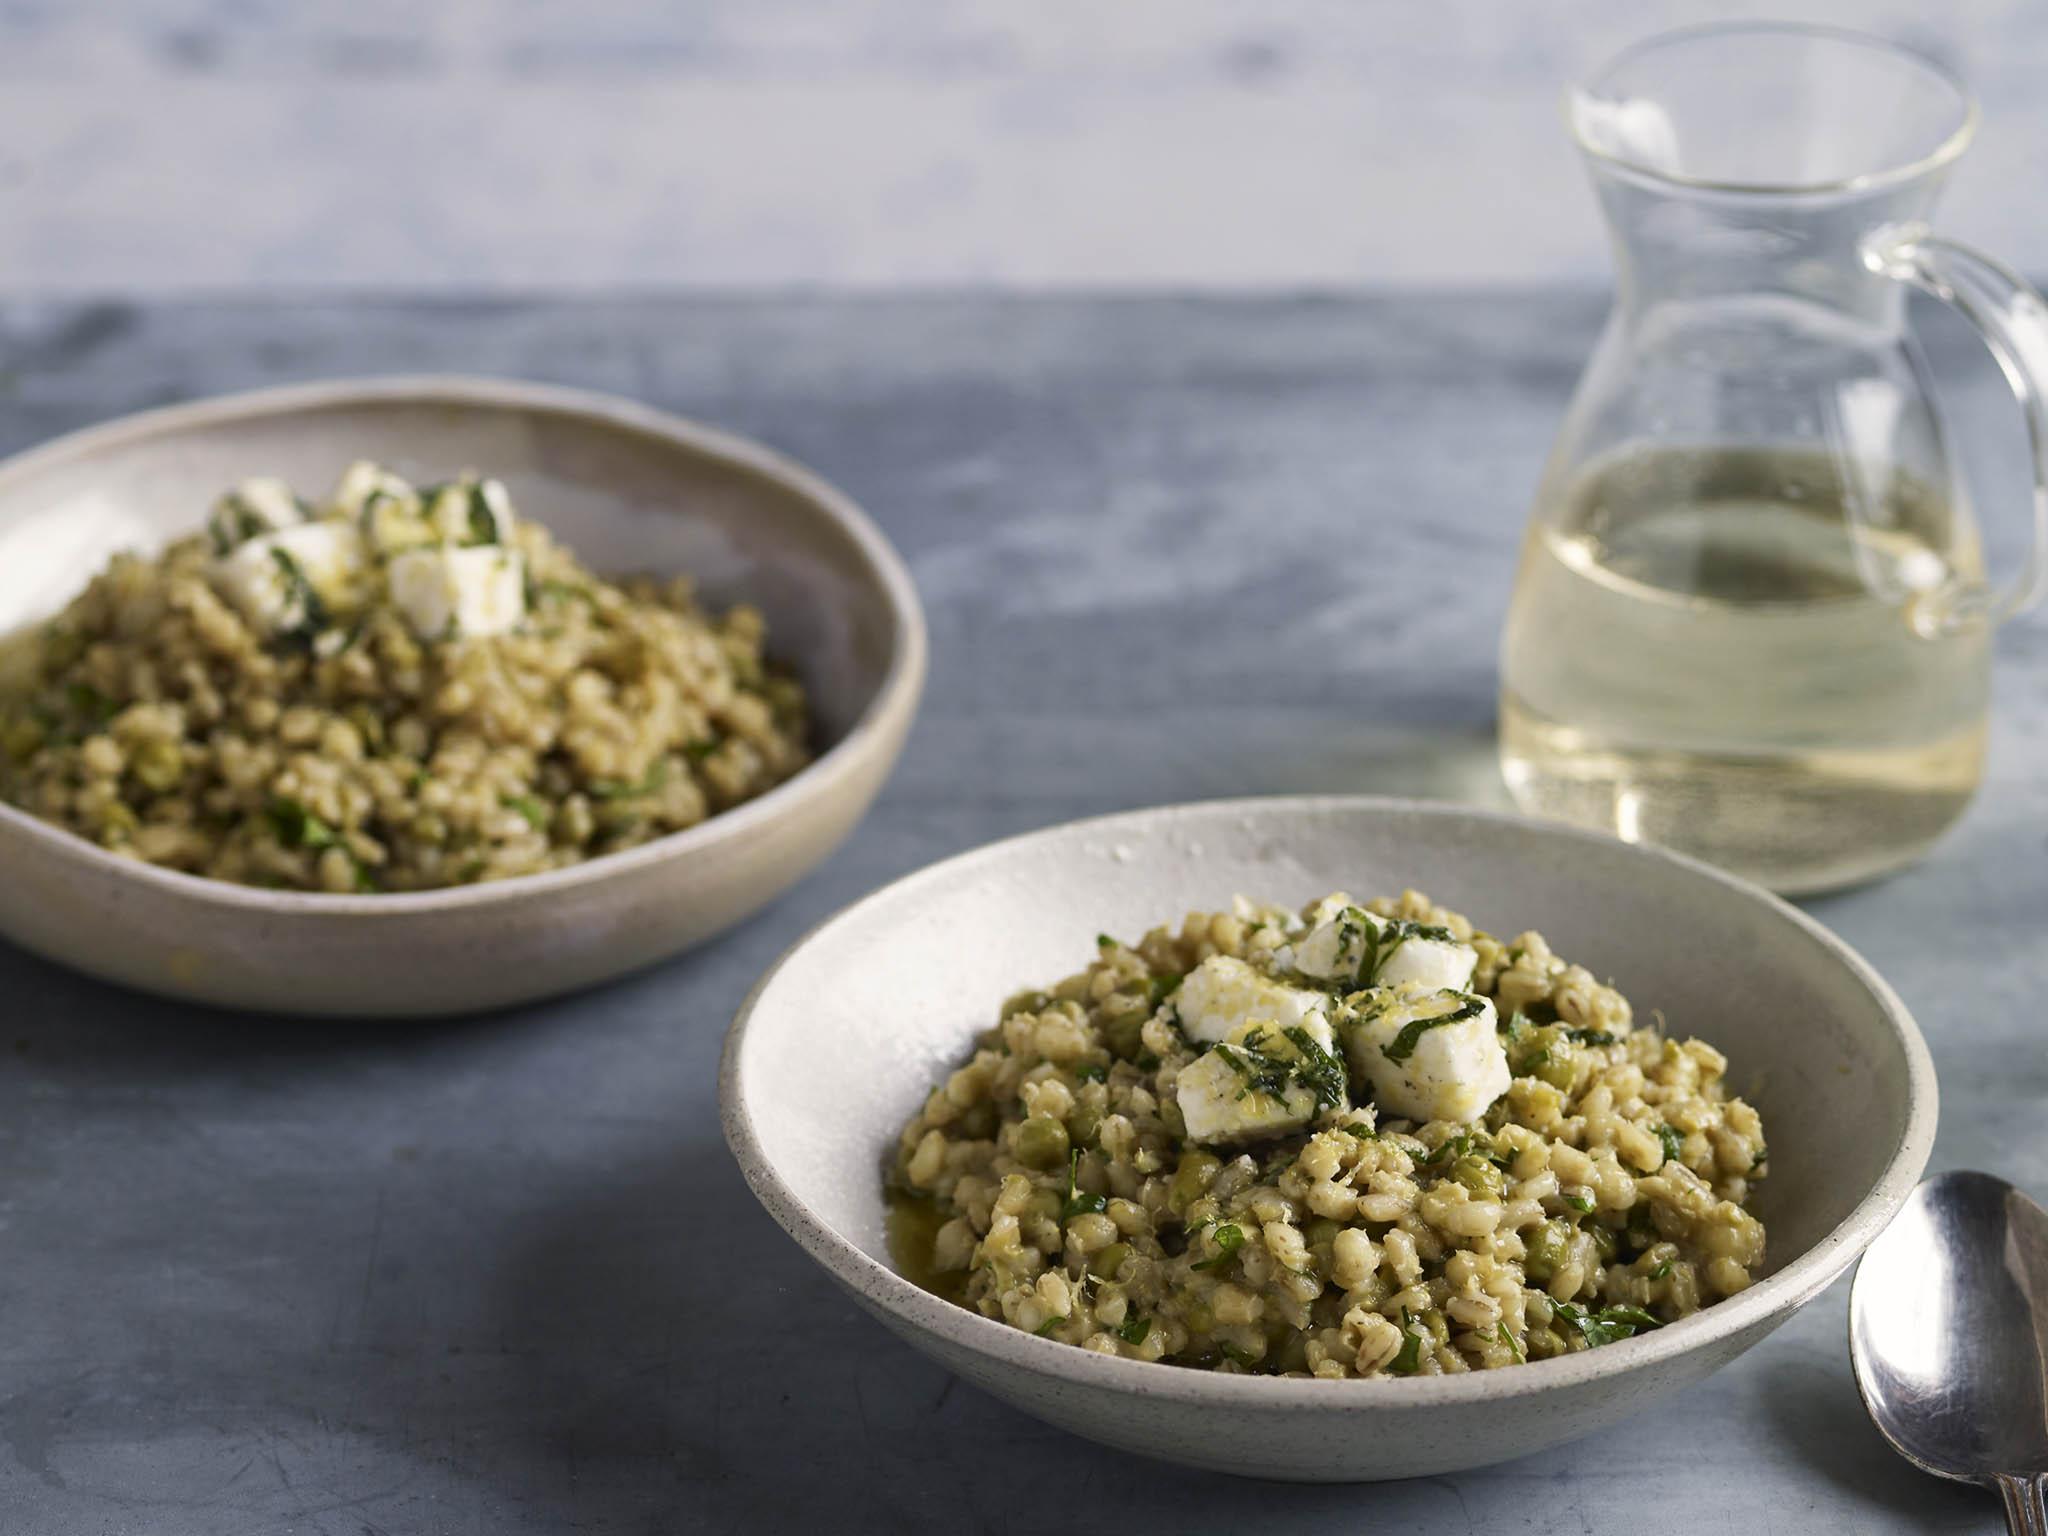 Using pearl barley instead of rice makes this risotto an easy but filling meal